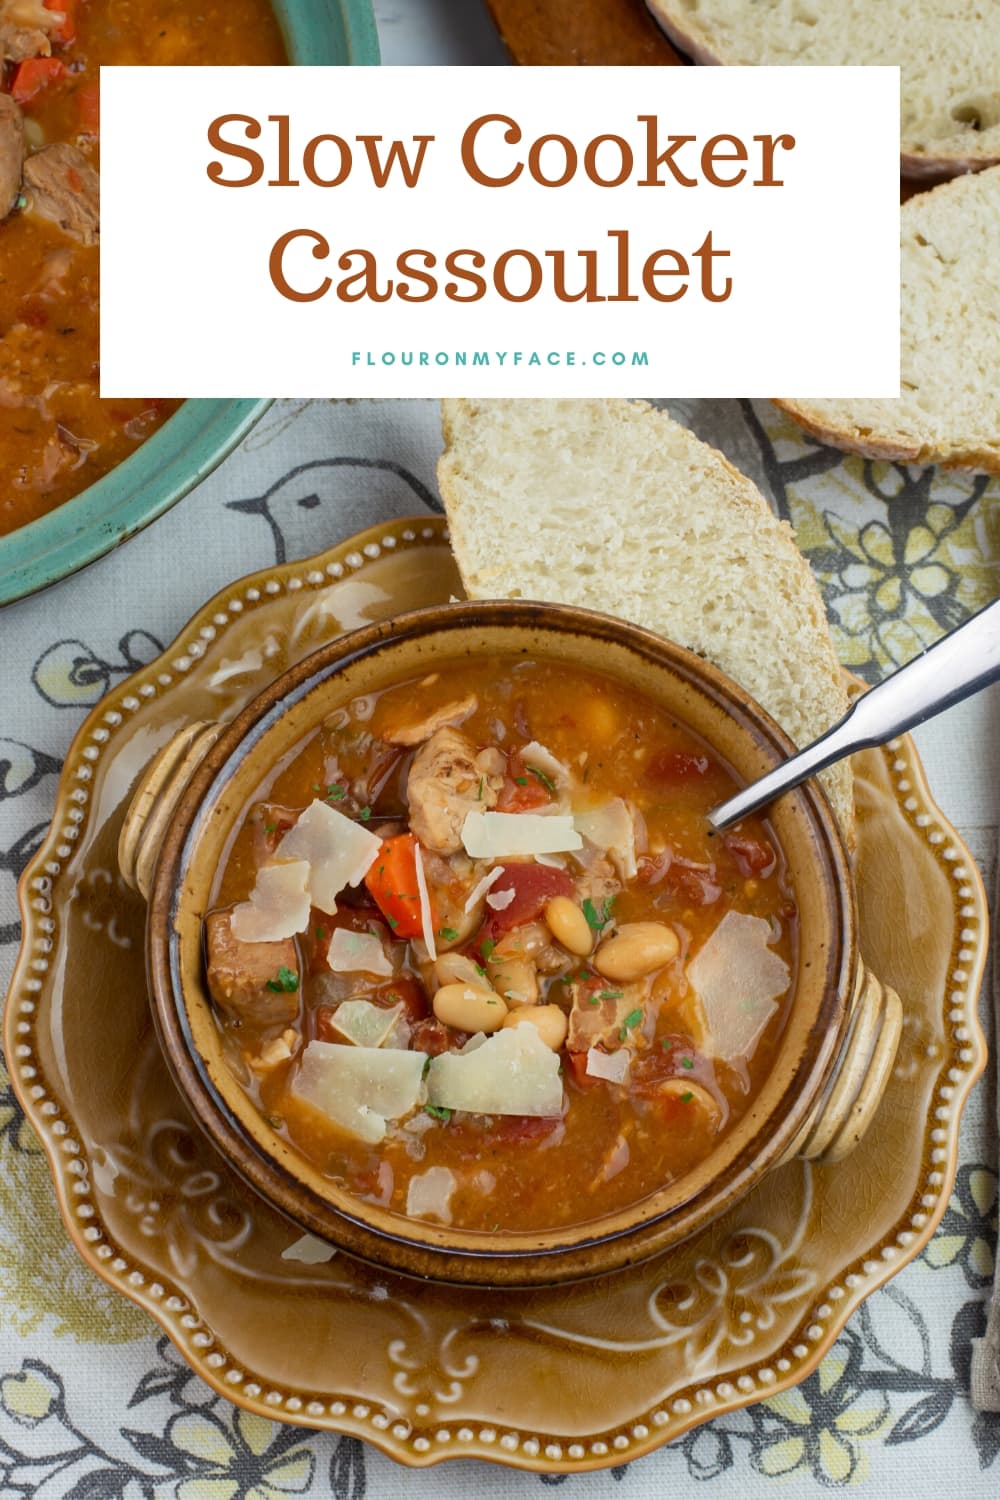 slow cooked Cassoulet in a brown crock served with rustic bread.